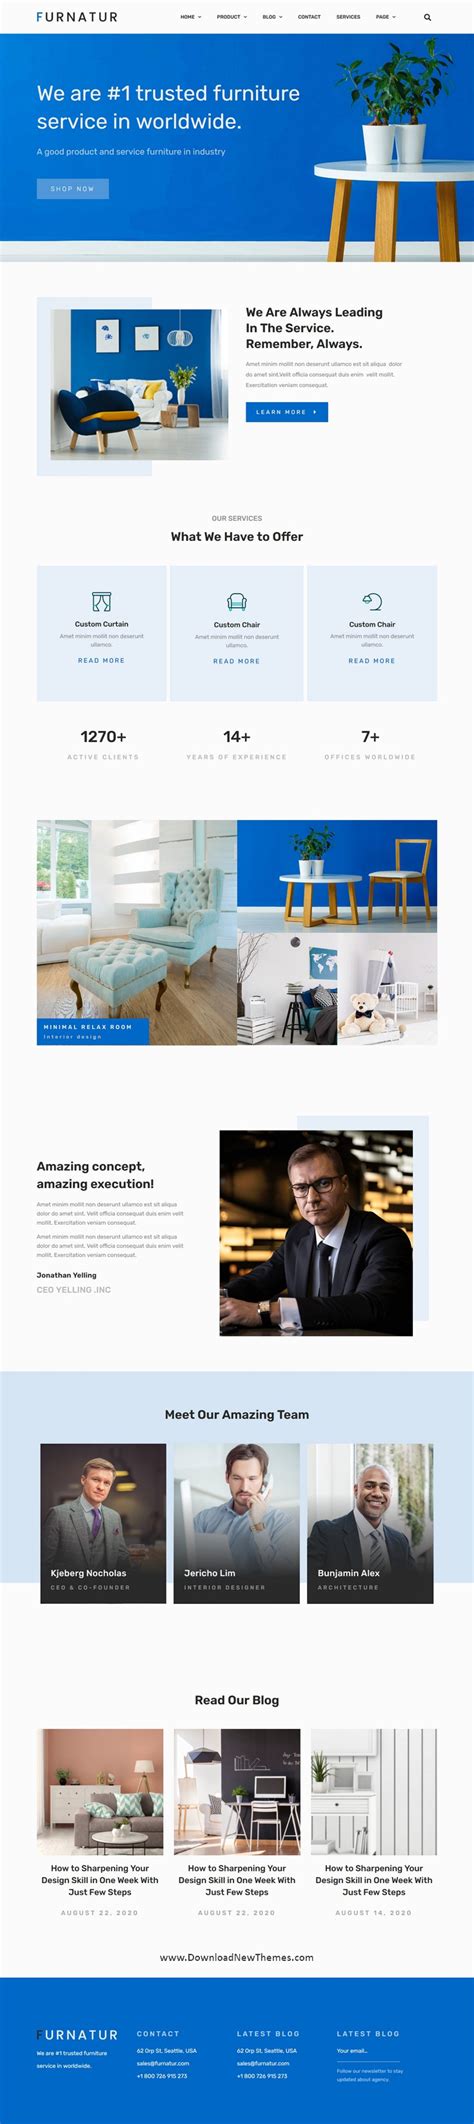 Furnatur Furniture Ecommerce Template Kit Download New Themes